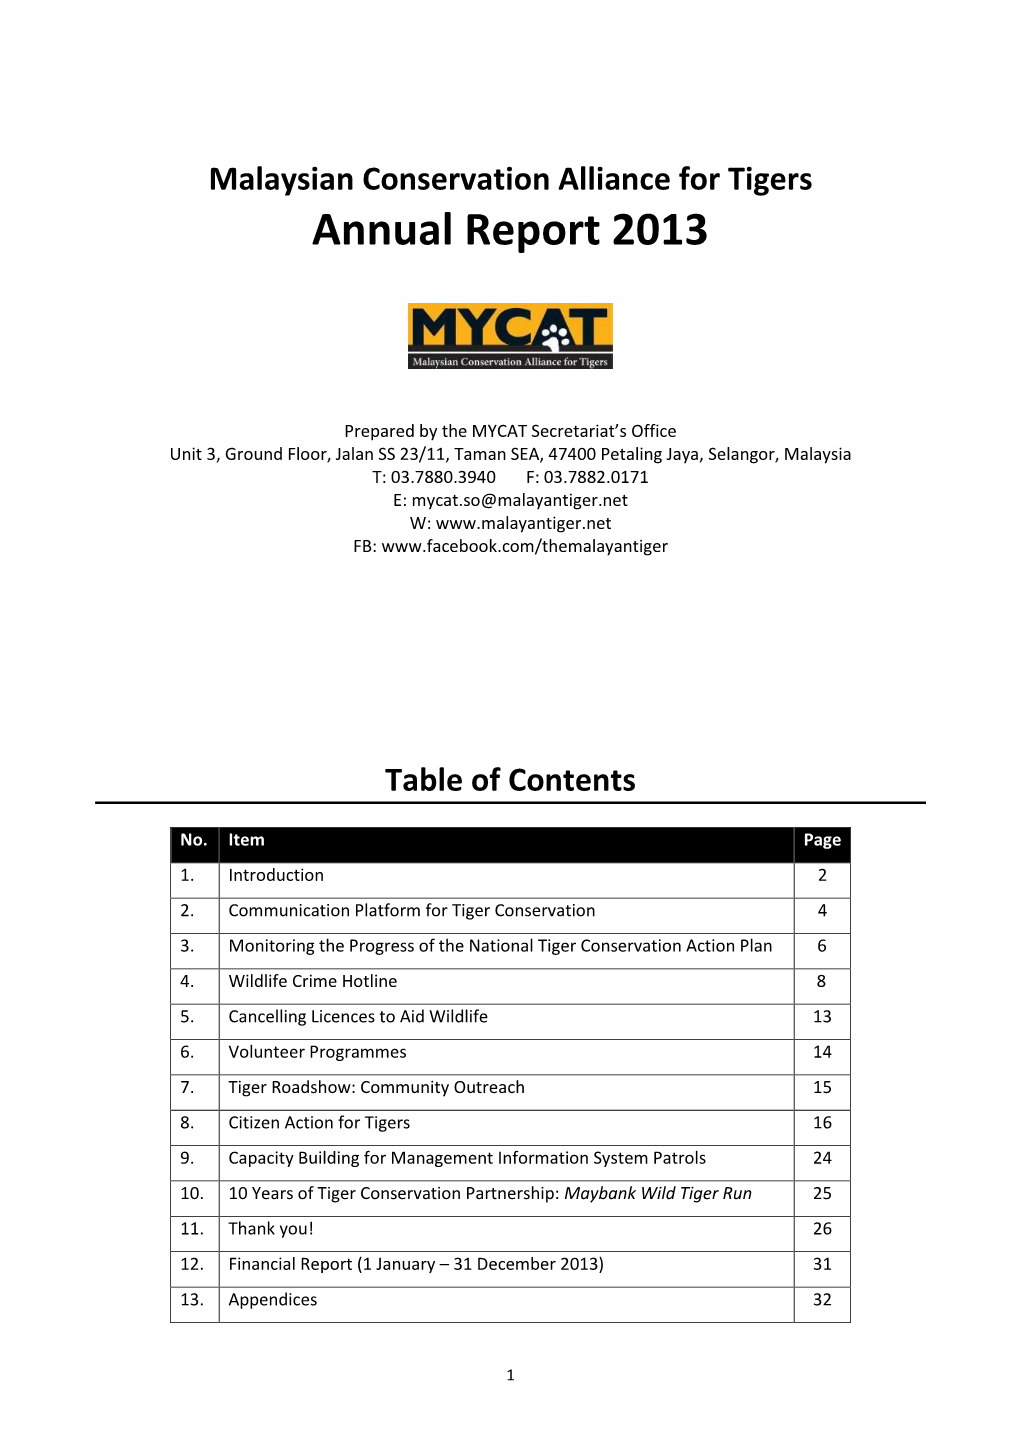 Malaysian Conservation Alliance for Tigers Annual Report 2013